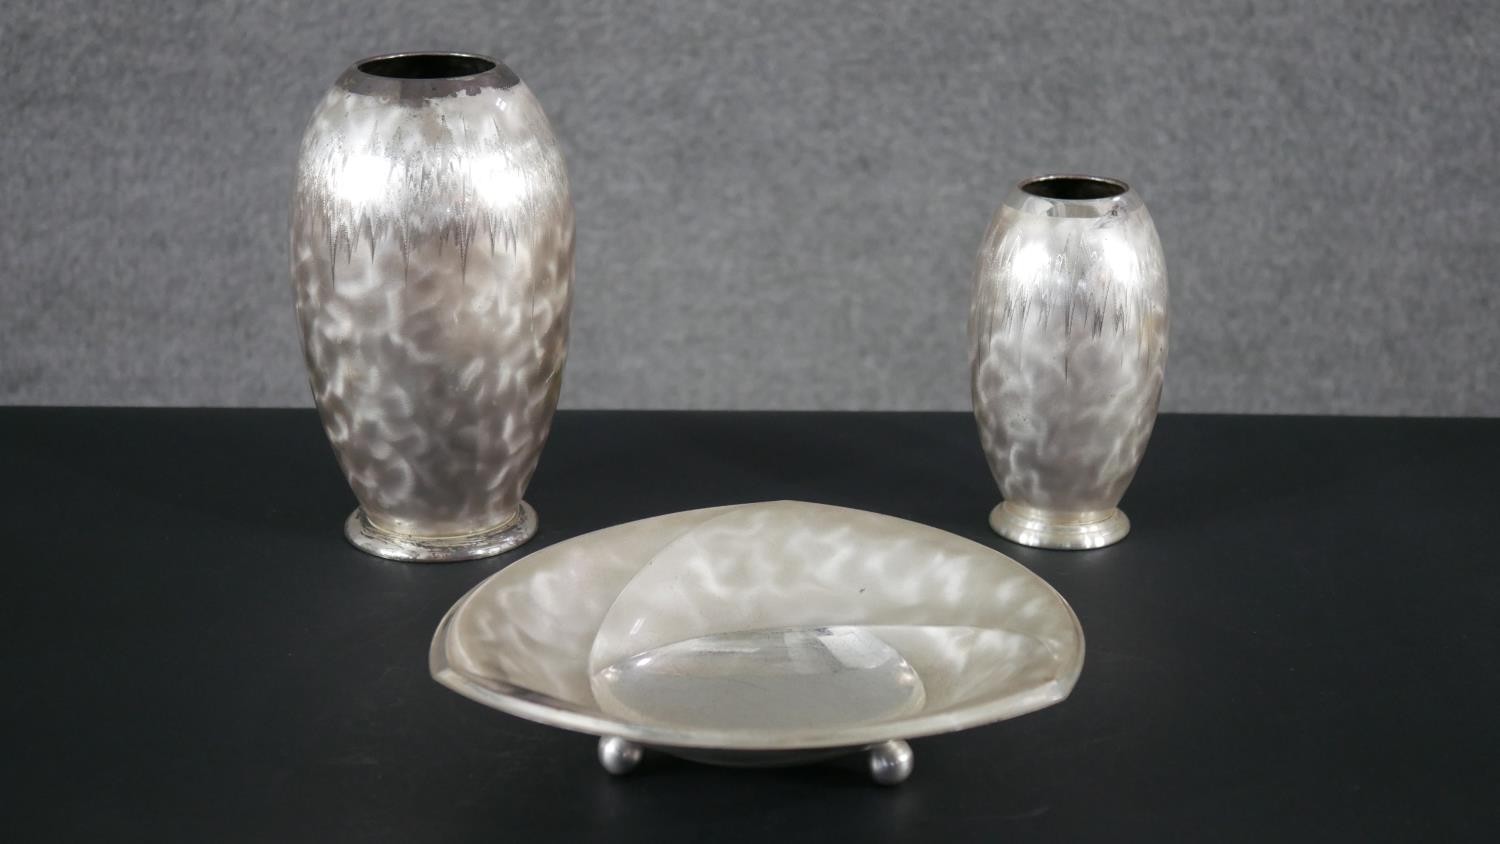 A collection of Art Deco Ikora silver plated pieces by WMF, including two vases with zigzag design